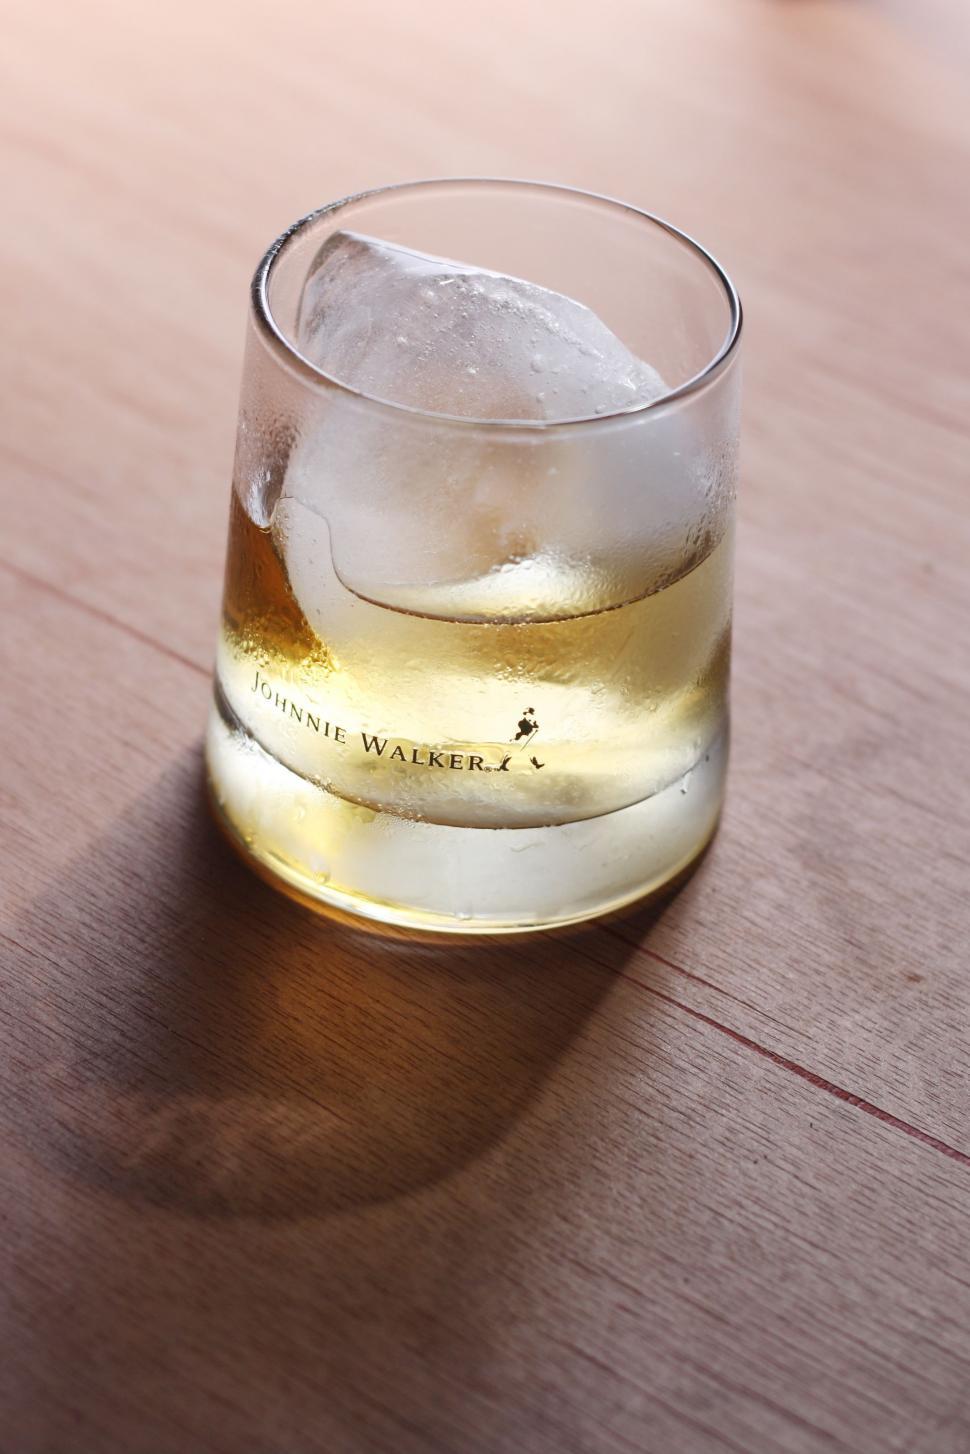 Free Image of Johnnie Walker Whisky 